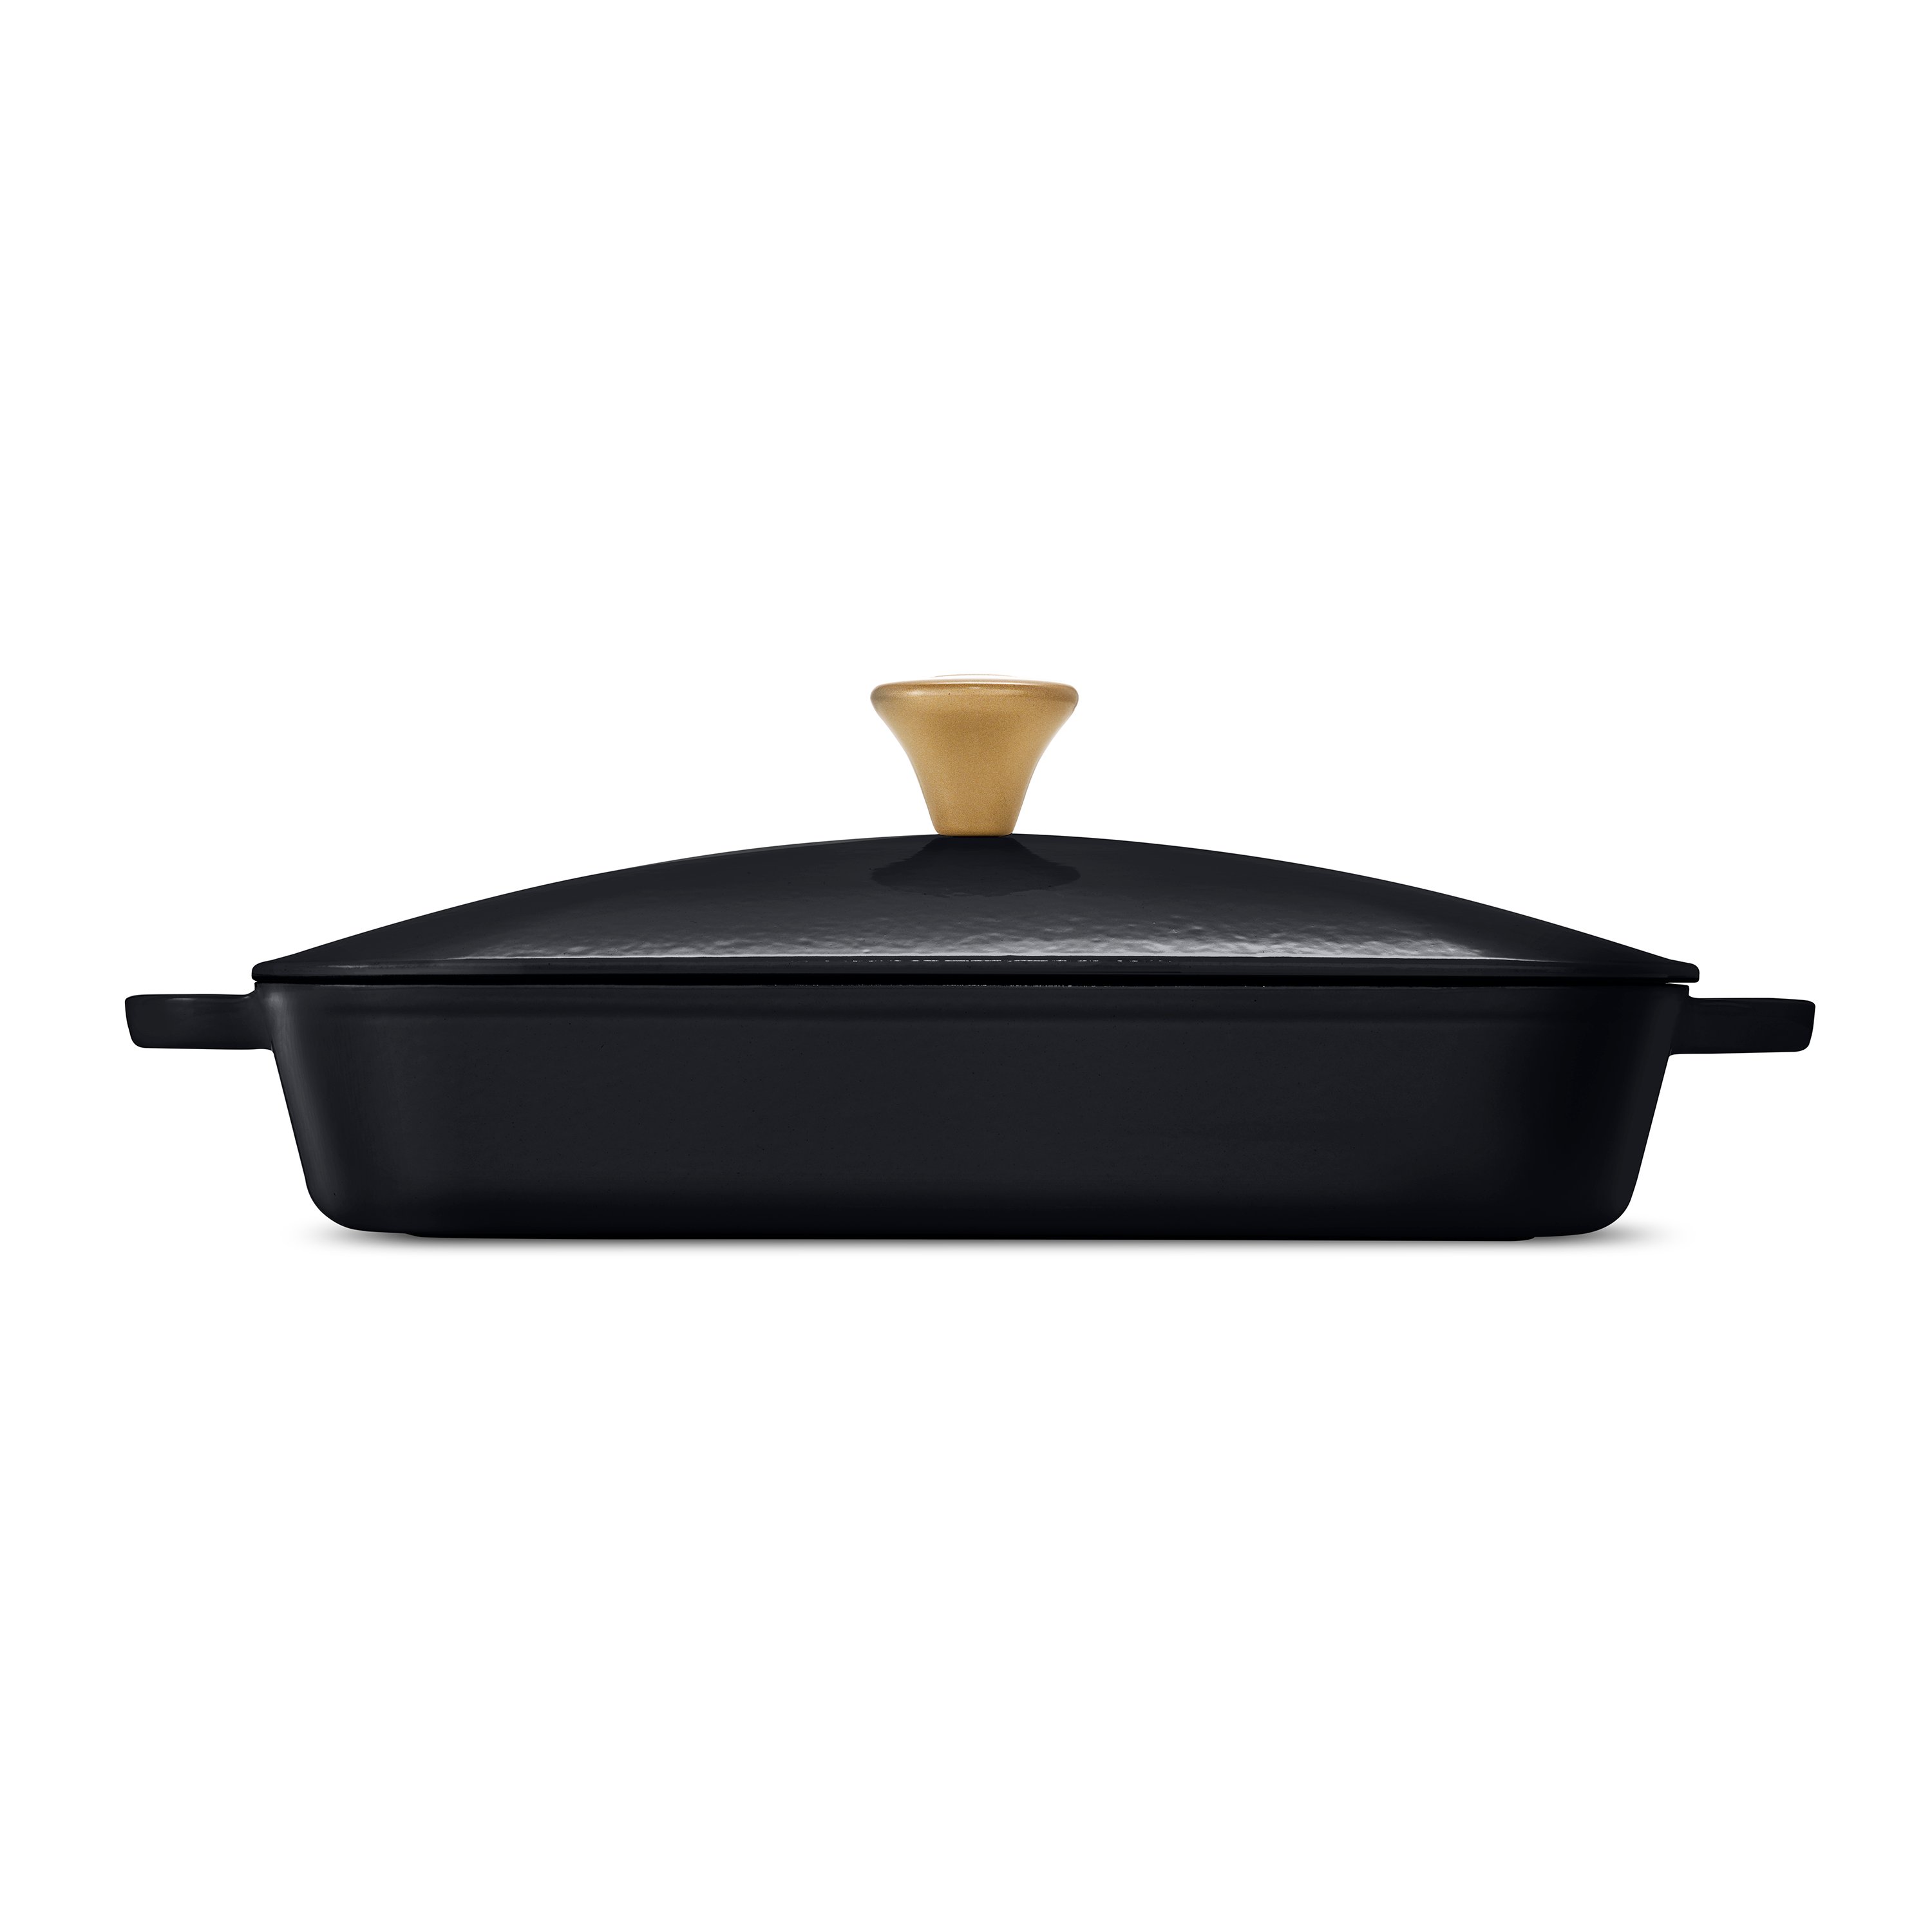 Kitchen & Table by H-E-B Enameled Cast Iron Skillet - Classic Black